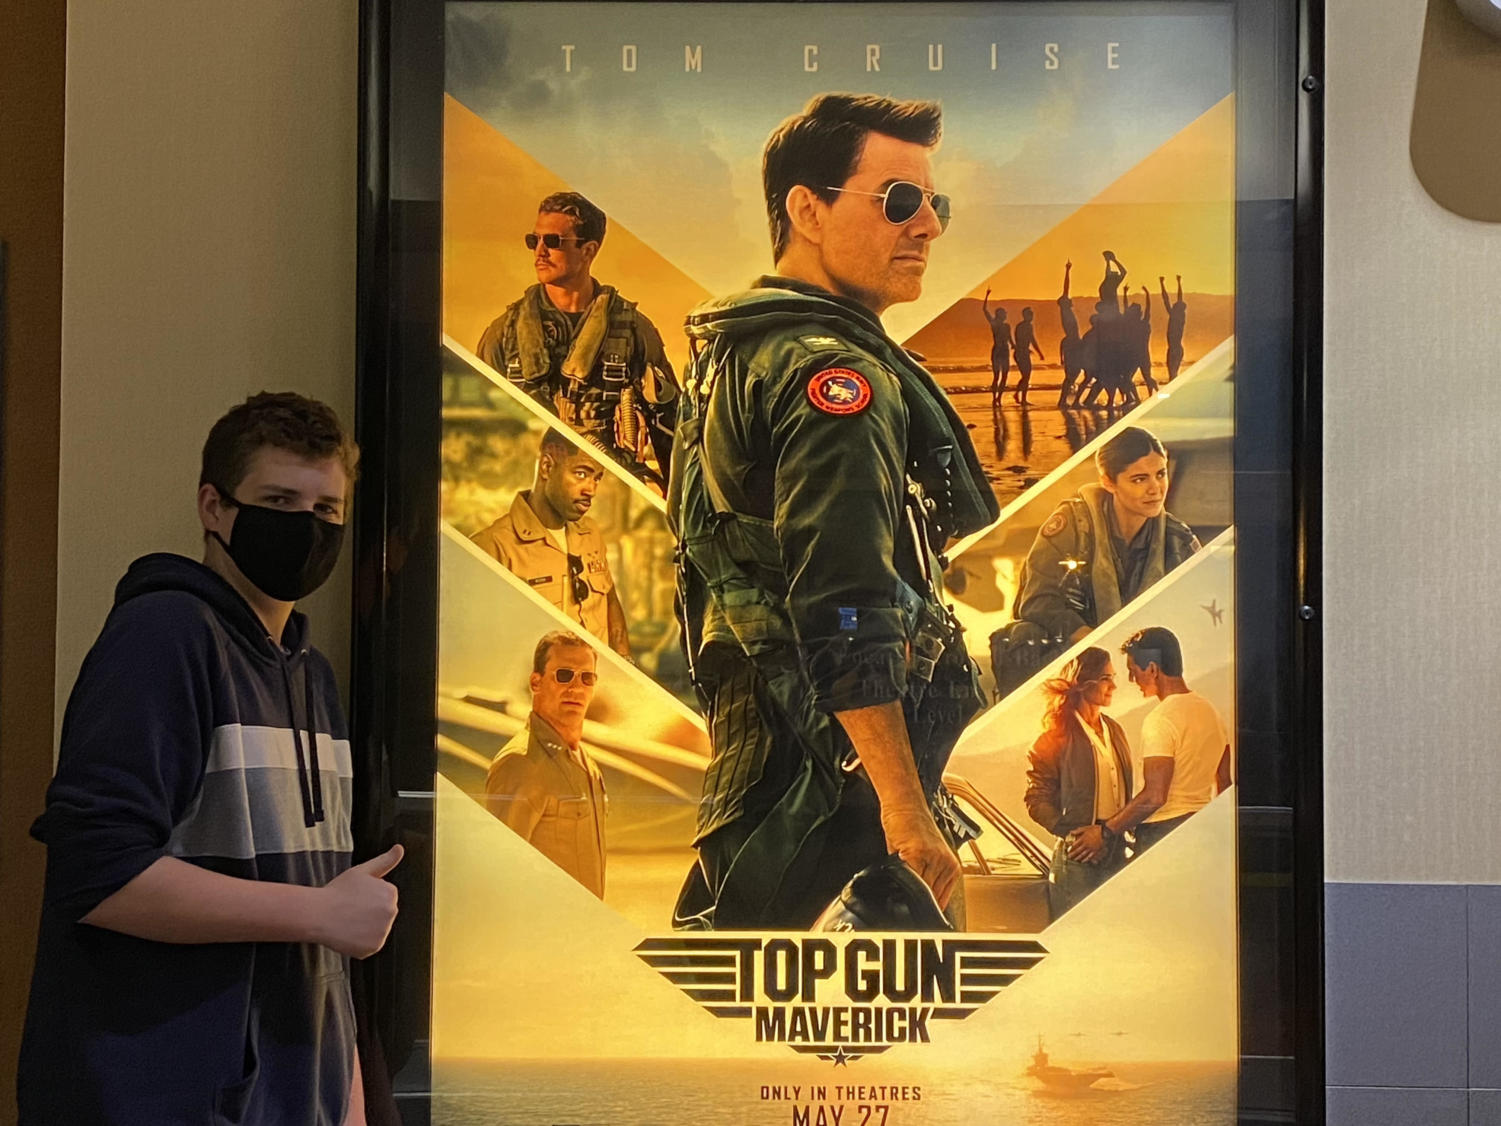 On May 6, 2022, Andrew Reynolds went to Fairfax Towne Center movie theater where he saw a poster for “Top Gun: Maverick” which he plans to go see when it releases.